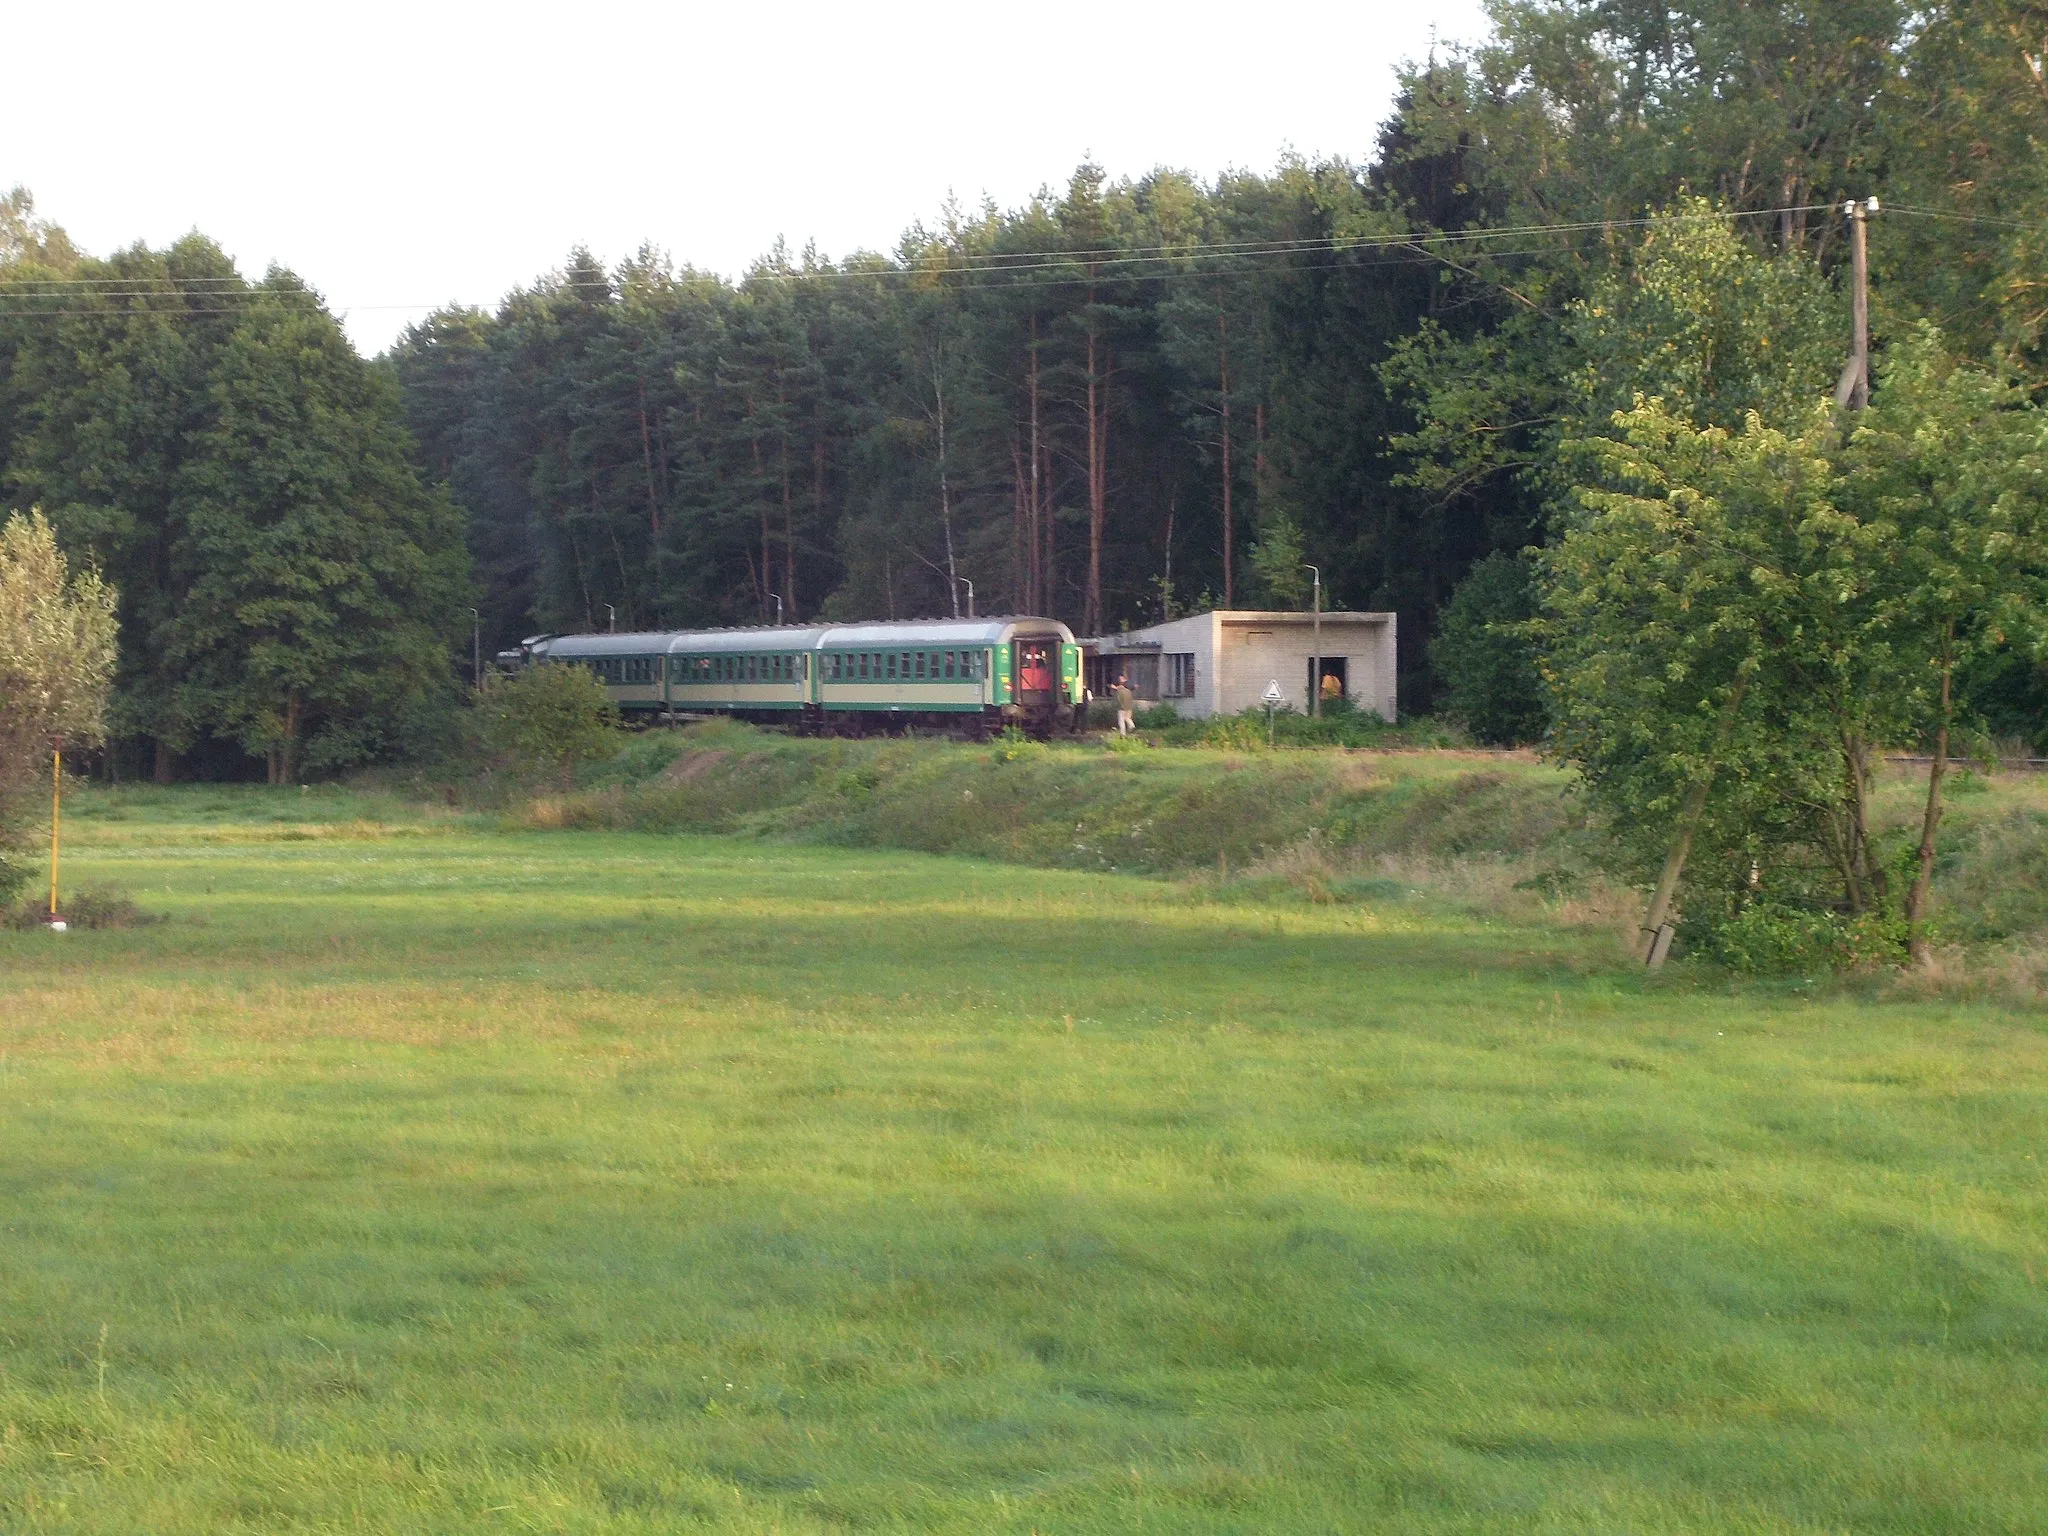 Photo showing: Tourist train at a disused station in Jelonki, Poland, on Ostrołęka – Małkinia route. Picture was taken from a crossing just outside Przyborowie.